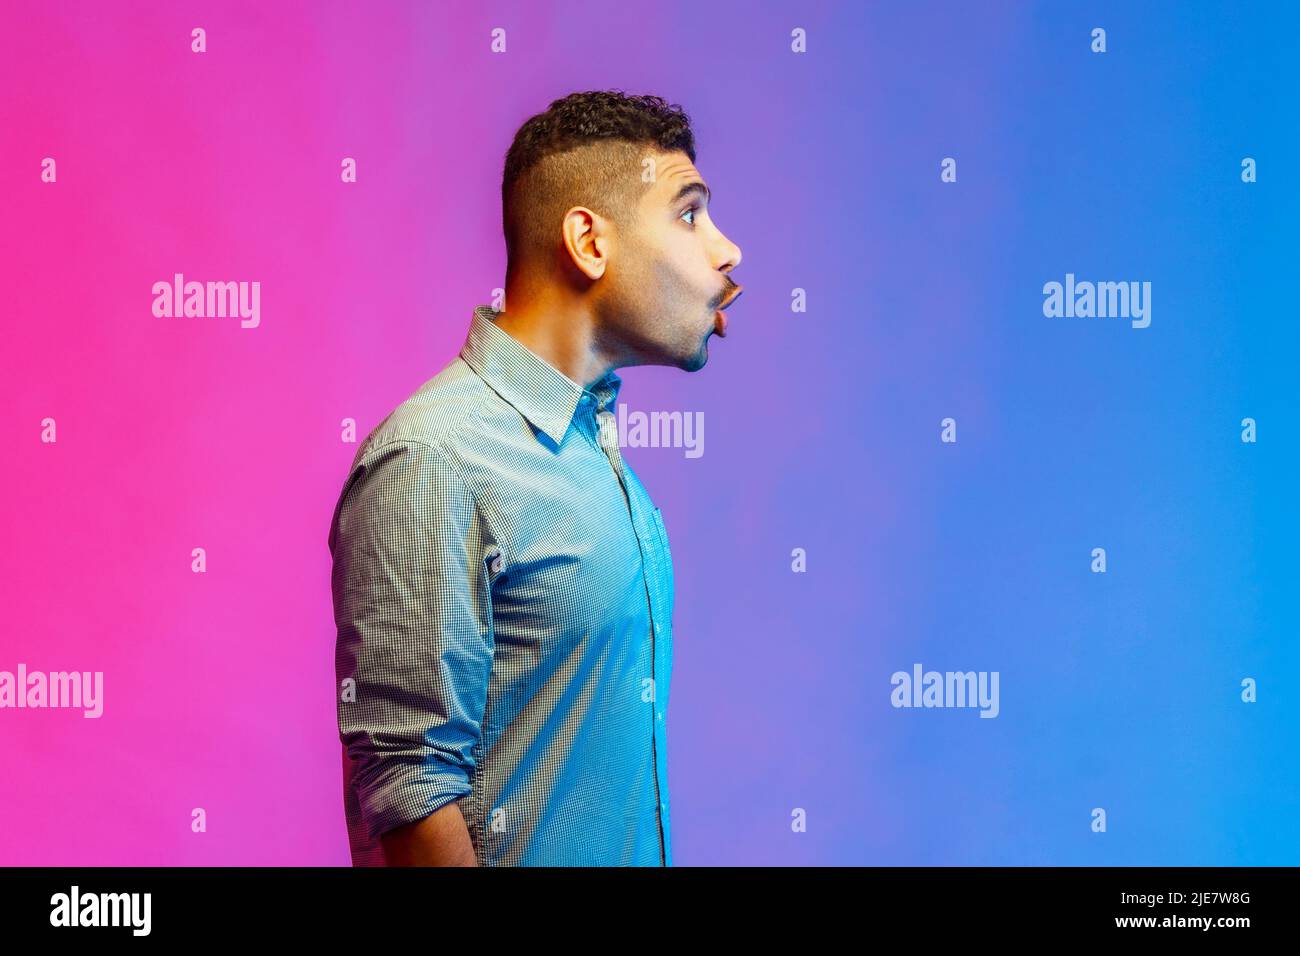 Portrait of astonished man in shirt looking right with big eyes and open mouth, shocked by news, empty copy space for text. Indoor studio shot isolated on colorful neon light background. Stock Photo